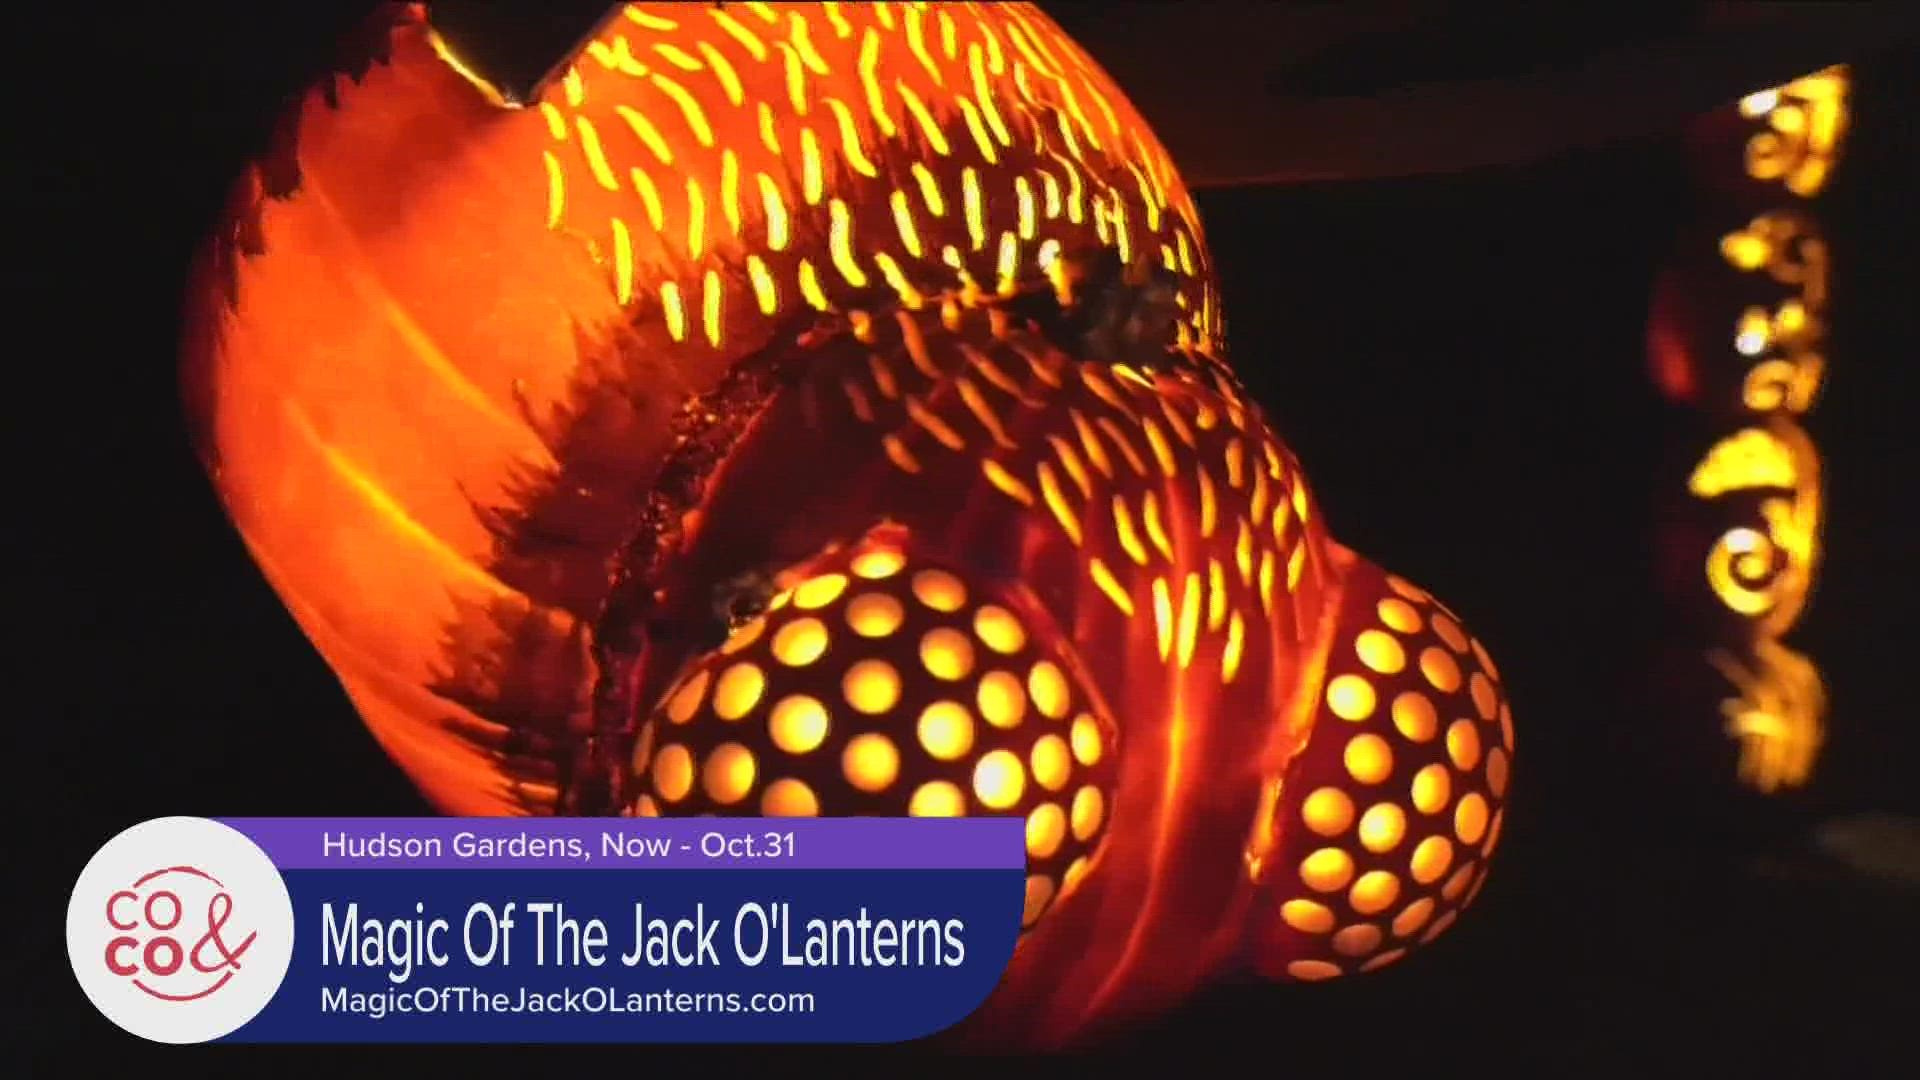 Don't miss Magic of The Jack O'Lanterns at Hudson Gardens in Littleton with over 7,000 carved pumpkins. It's going on now until October 31.